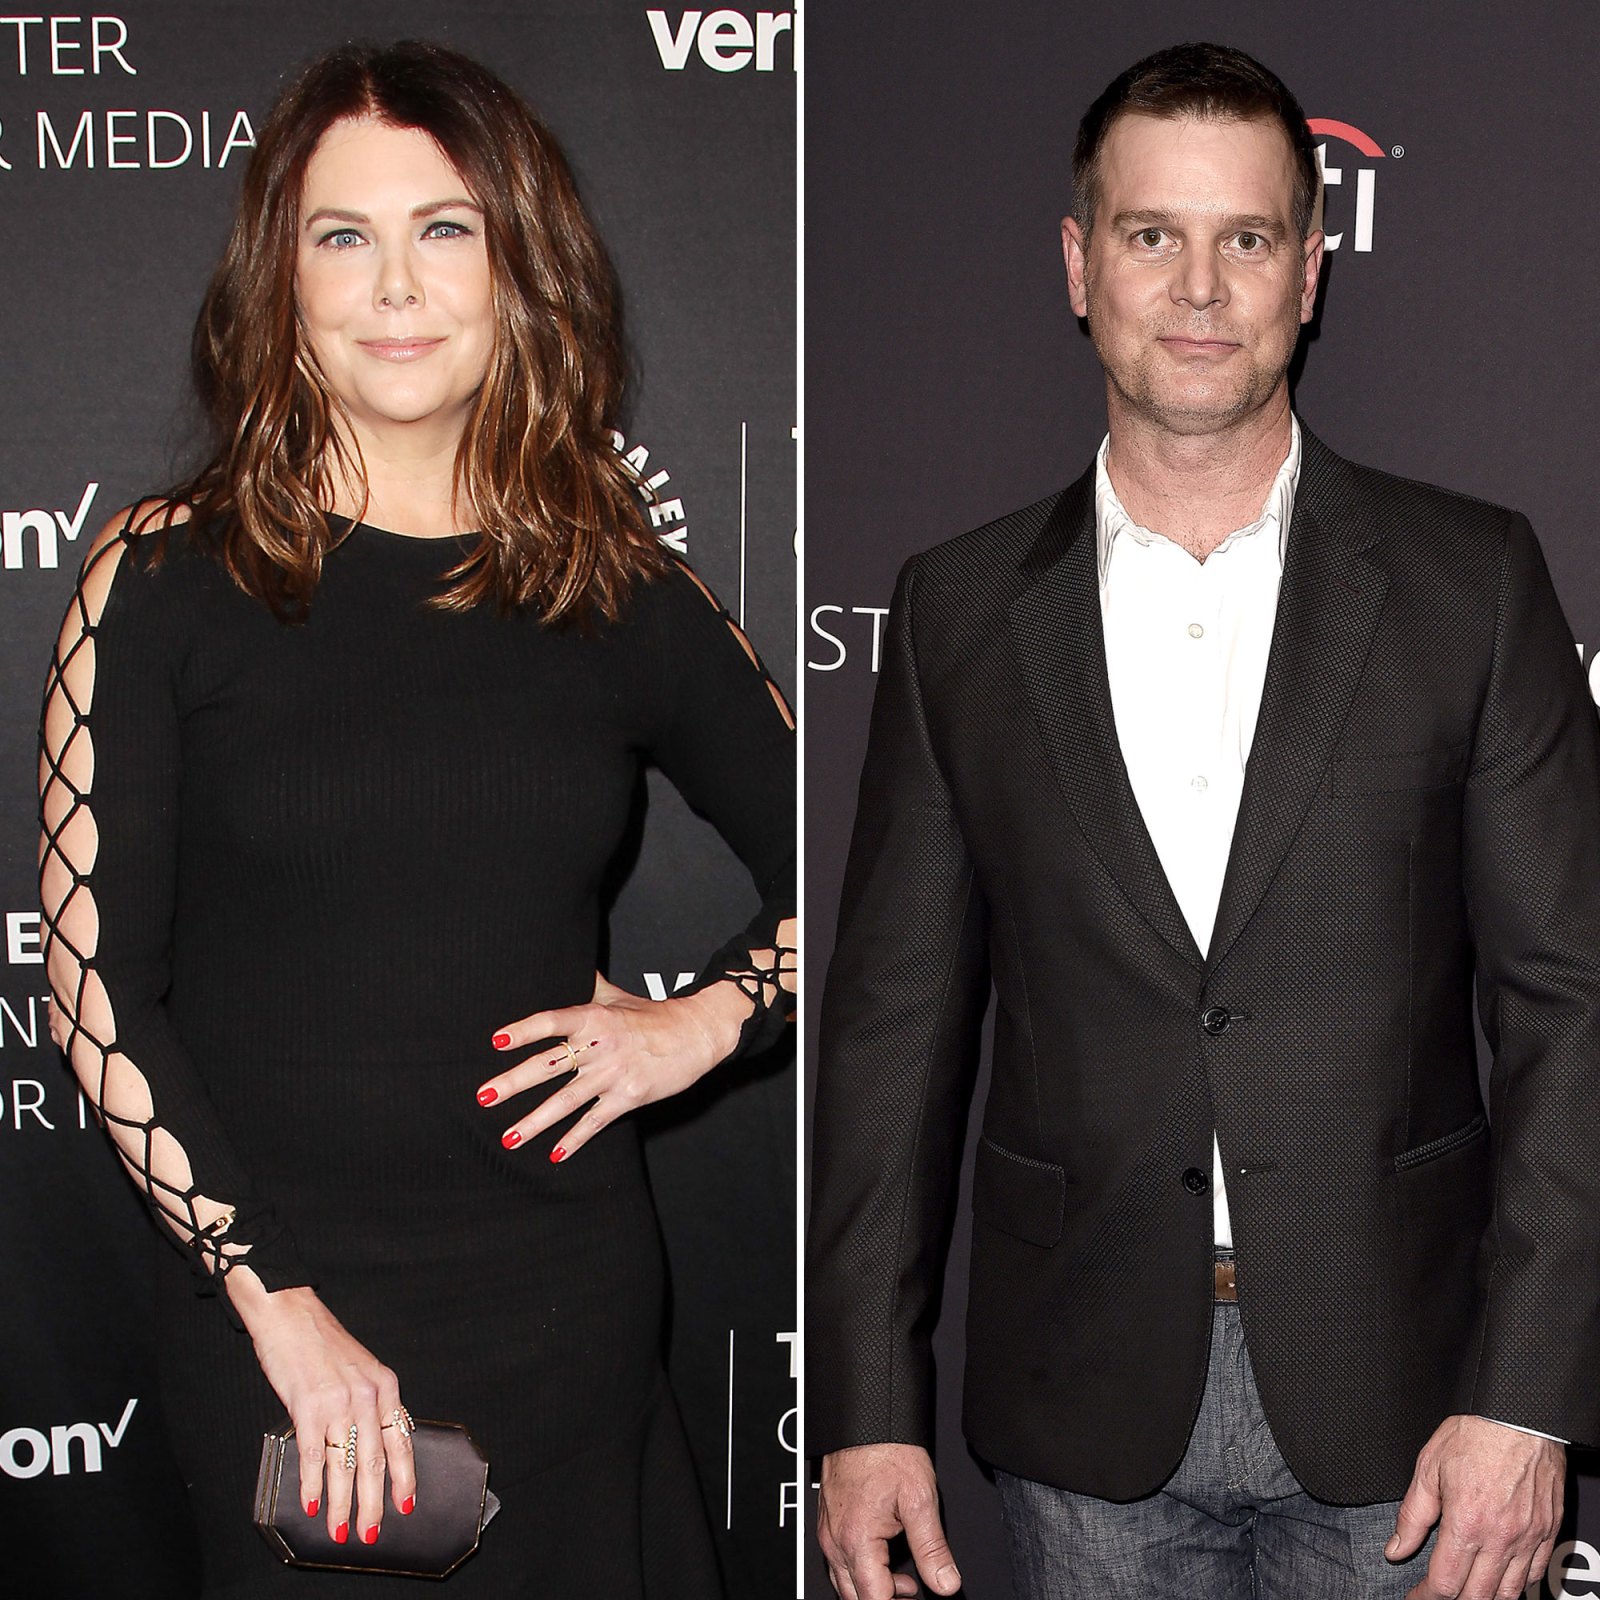 Lauren Graham and Peter Krause: A Timeline of Their Private Romance